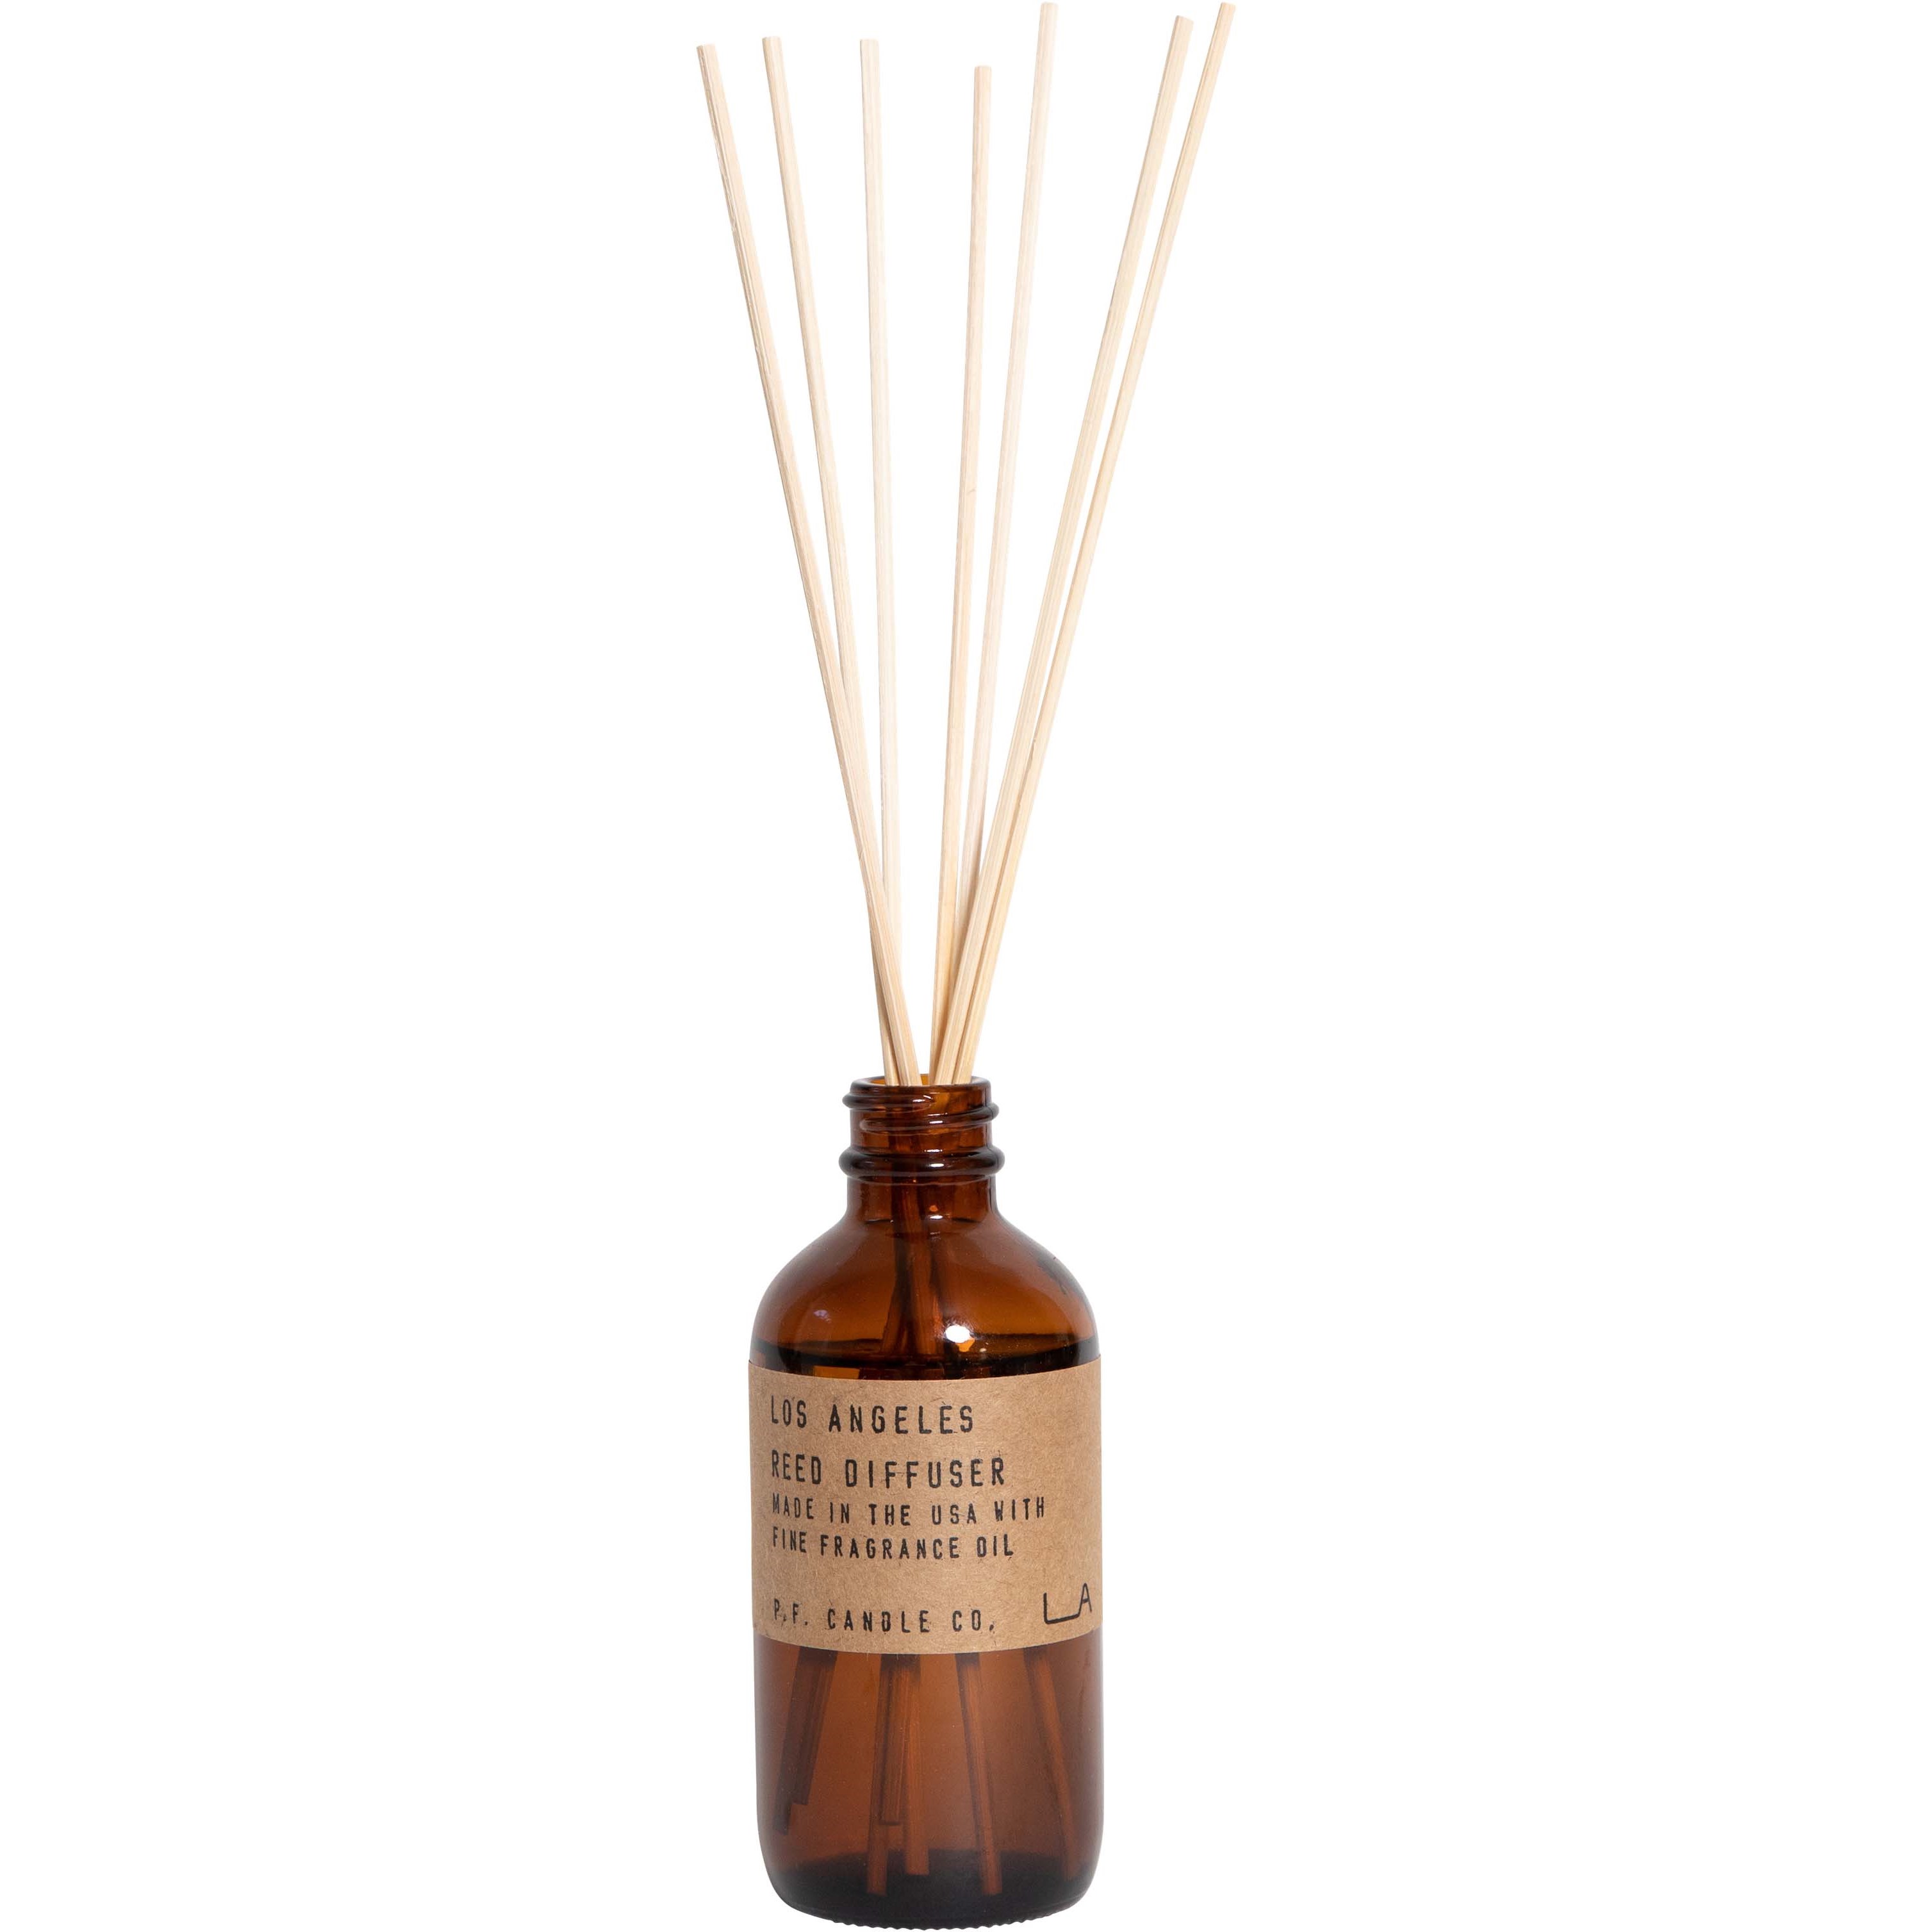 P.F. Candle Co. Los Angeles reed diffuser 103 ml